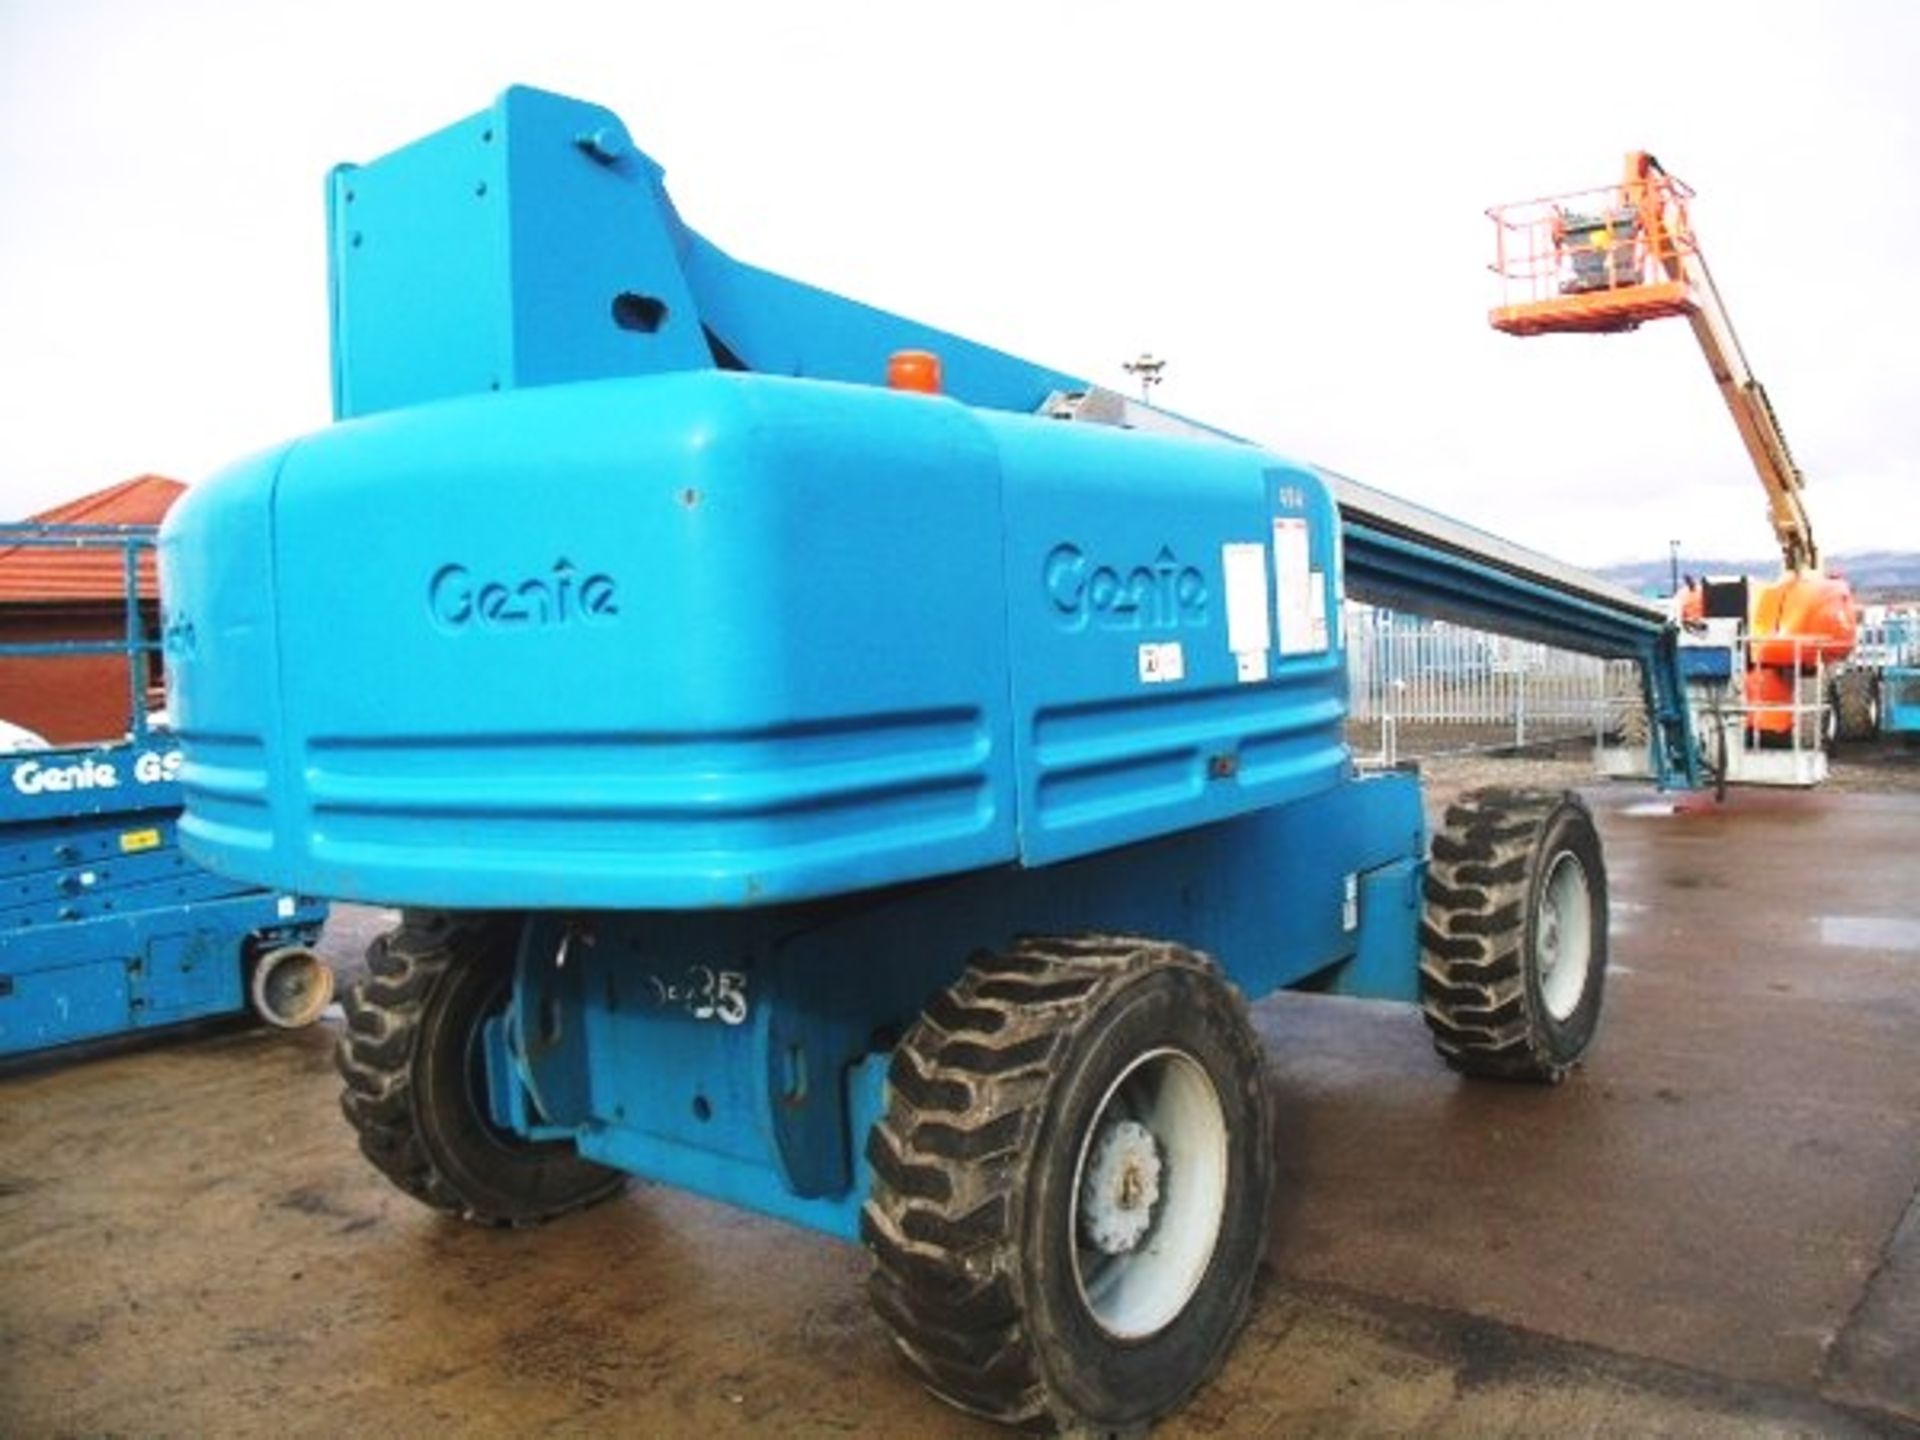 1999 GENIE 4X4 S85, s/n -1256, 5795hrs (verified), new alternator fitted 4 months ago, solid tyres. - Image 8 of 11